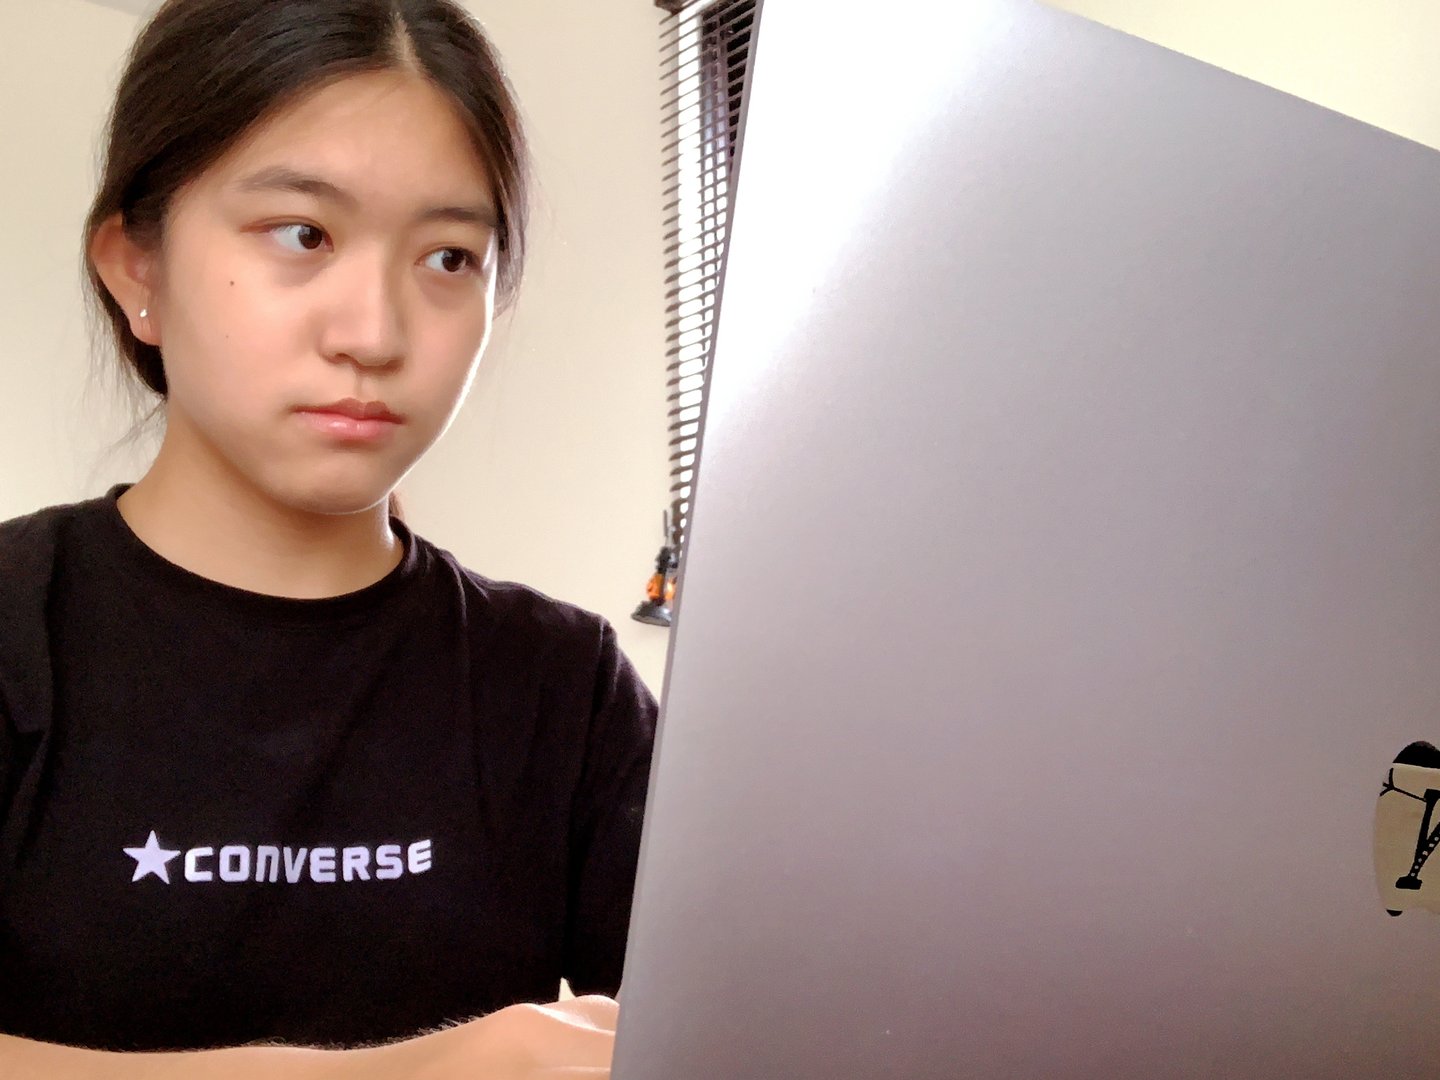 A young Chinese-Japanese girl sits with a determined look in front of her laptop computer.